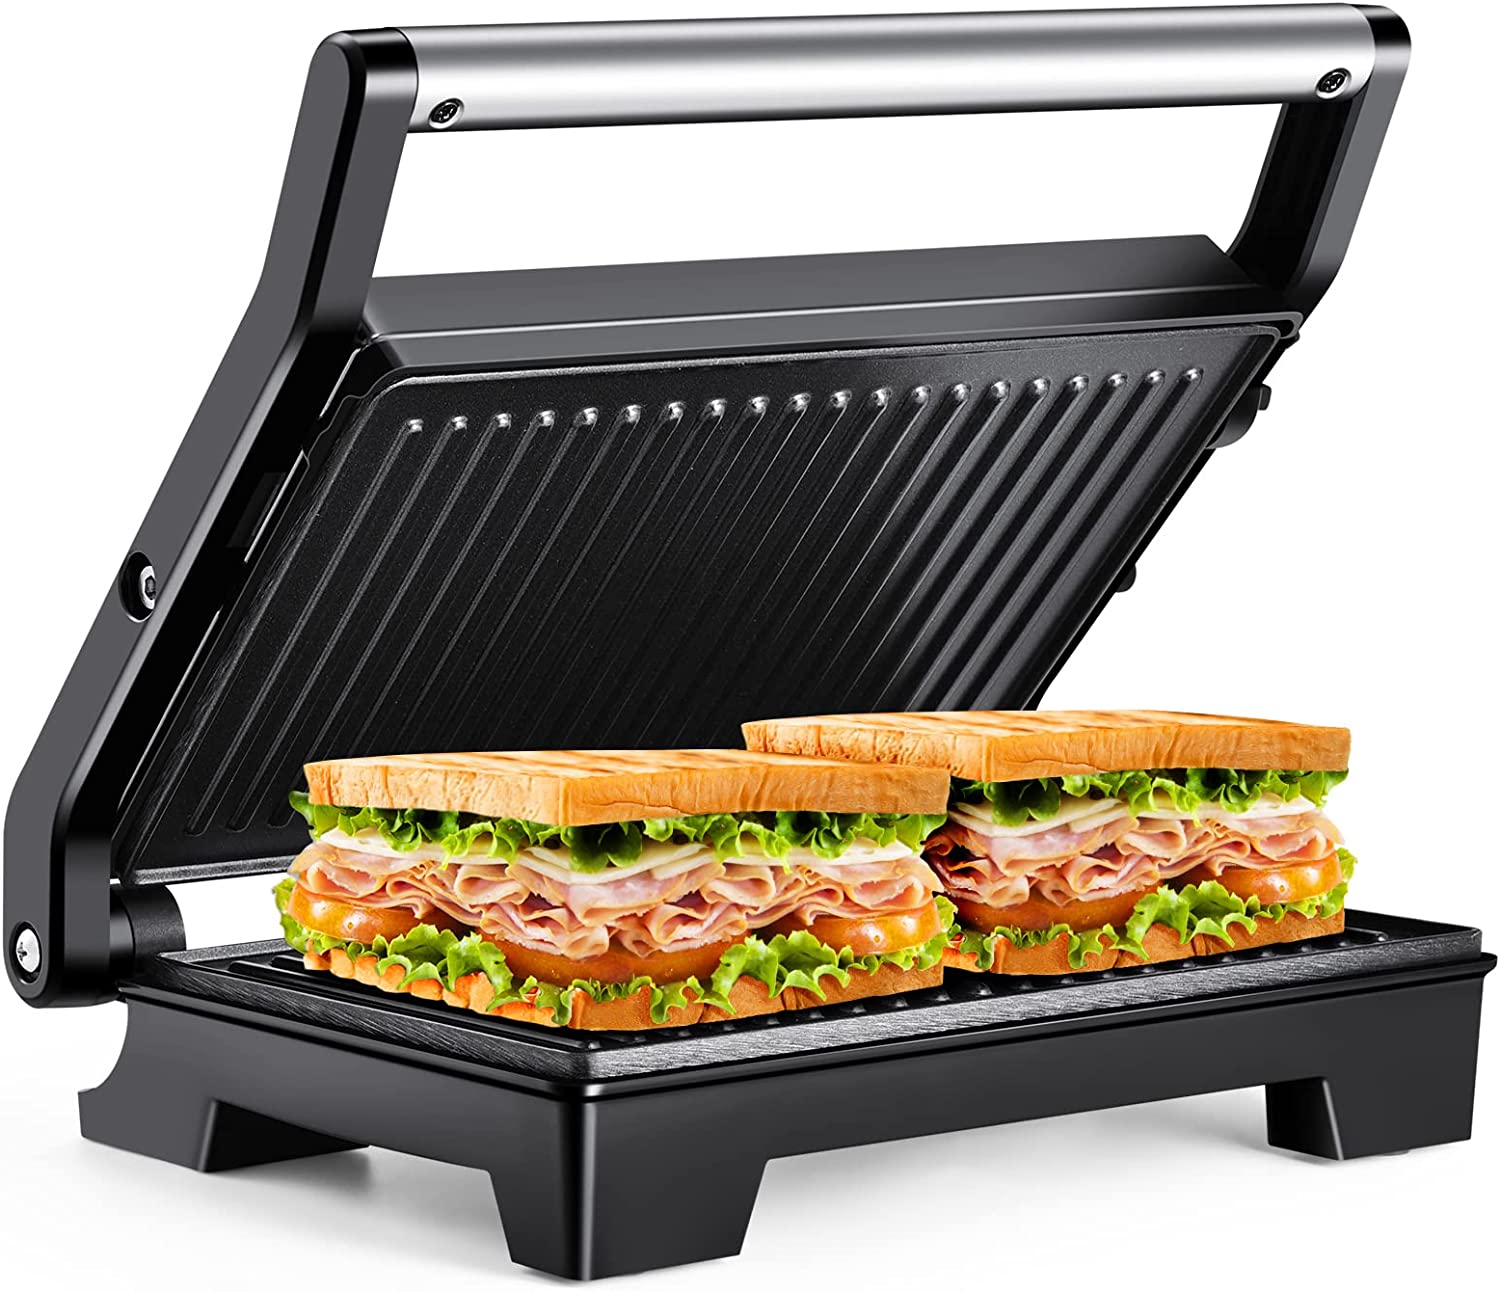 Tiastar Contact Grill for Sandwiches, Steak and Panini Grill, Sandwich Maker with Non-Stick Coating, Open 180 °, Light Indicator, 1000 W, Black